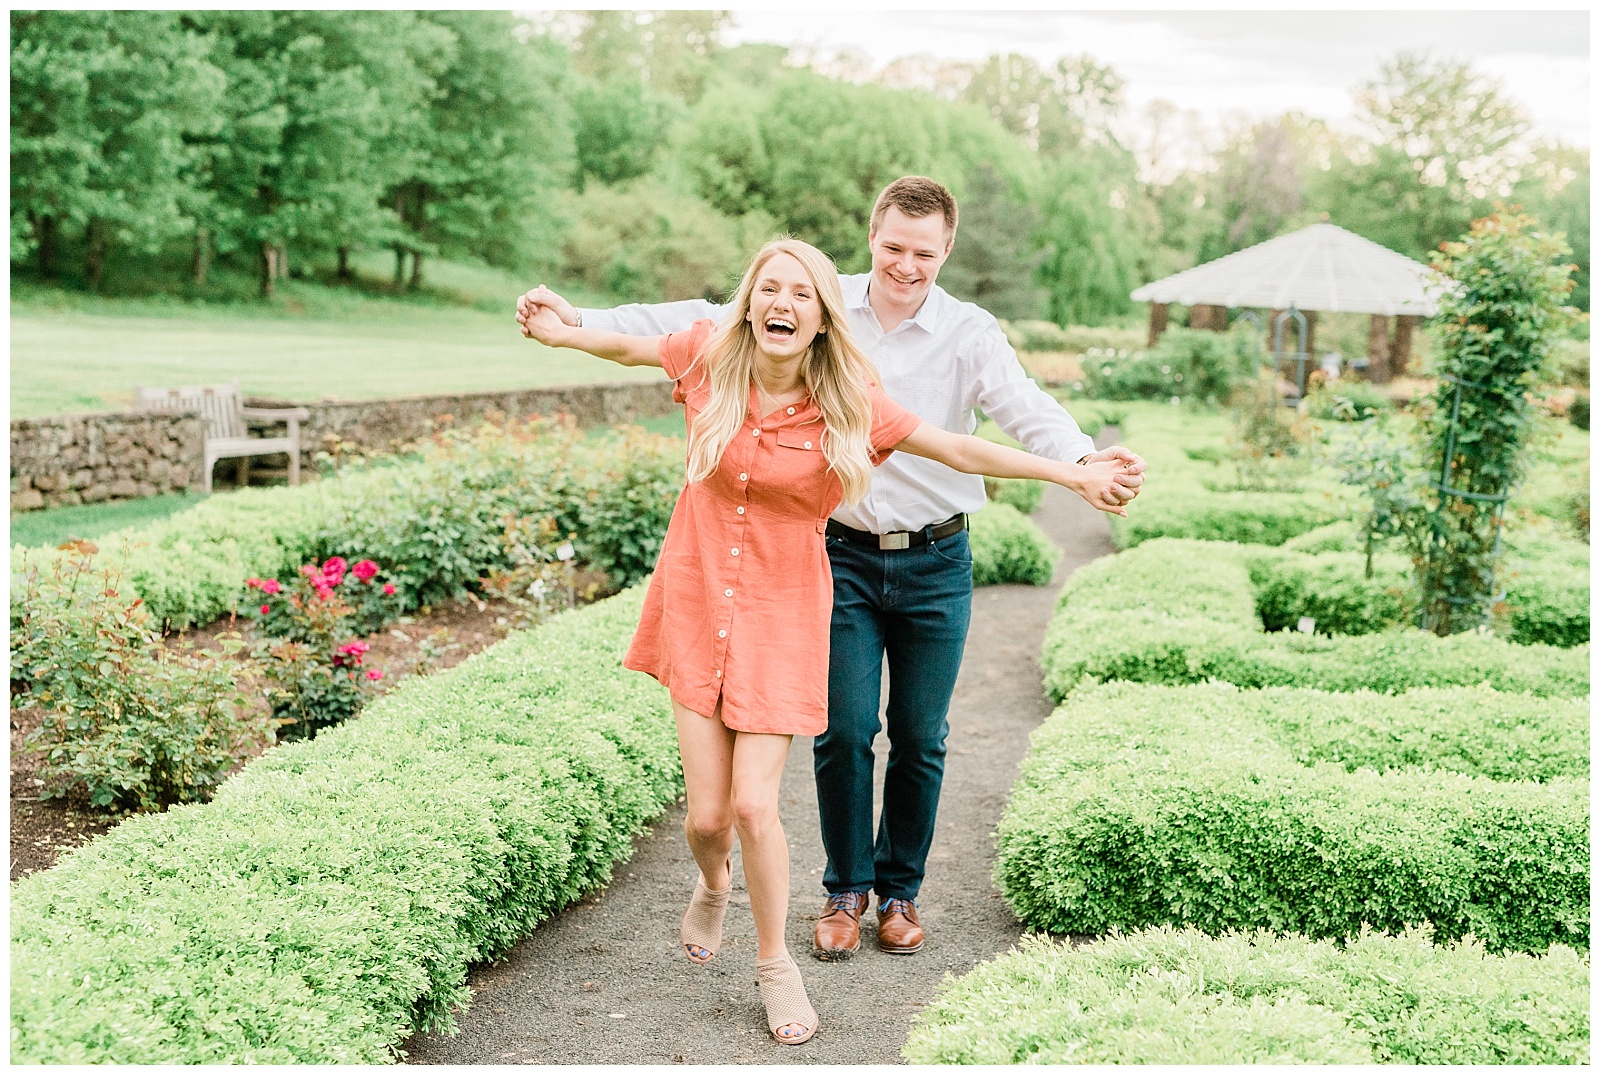 A couple holds hands laughing together through the gardens.